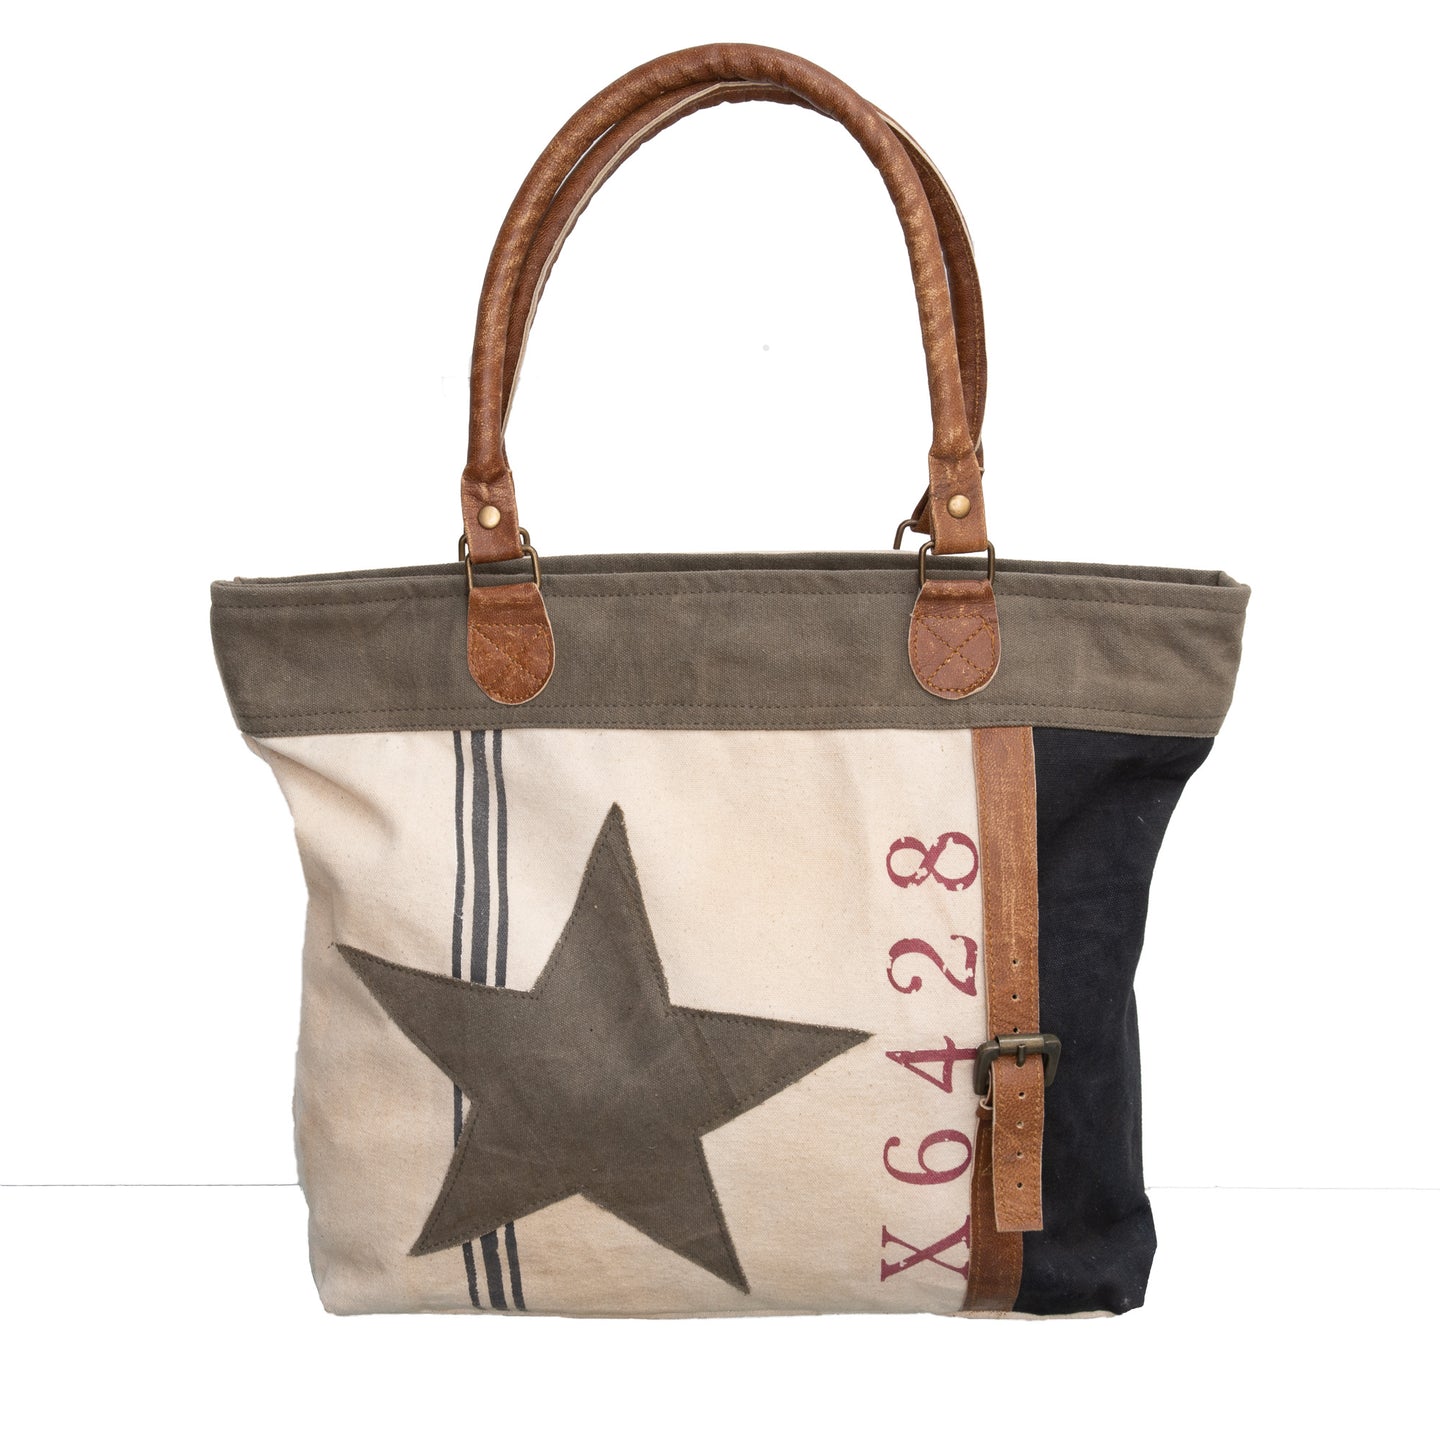 Recycled Canvas & Leather with Star and buckle Detail Shopper/Tote - Dorset Bay 007